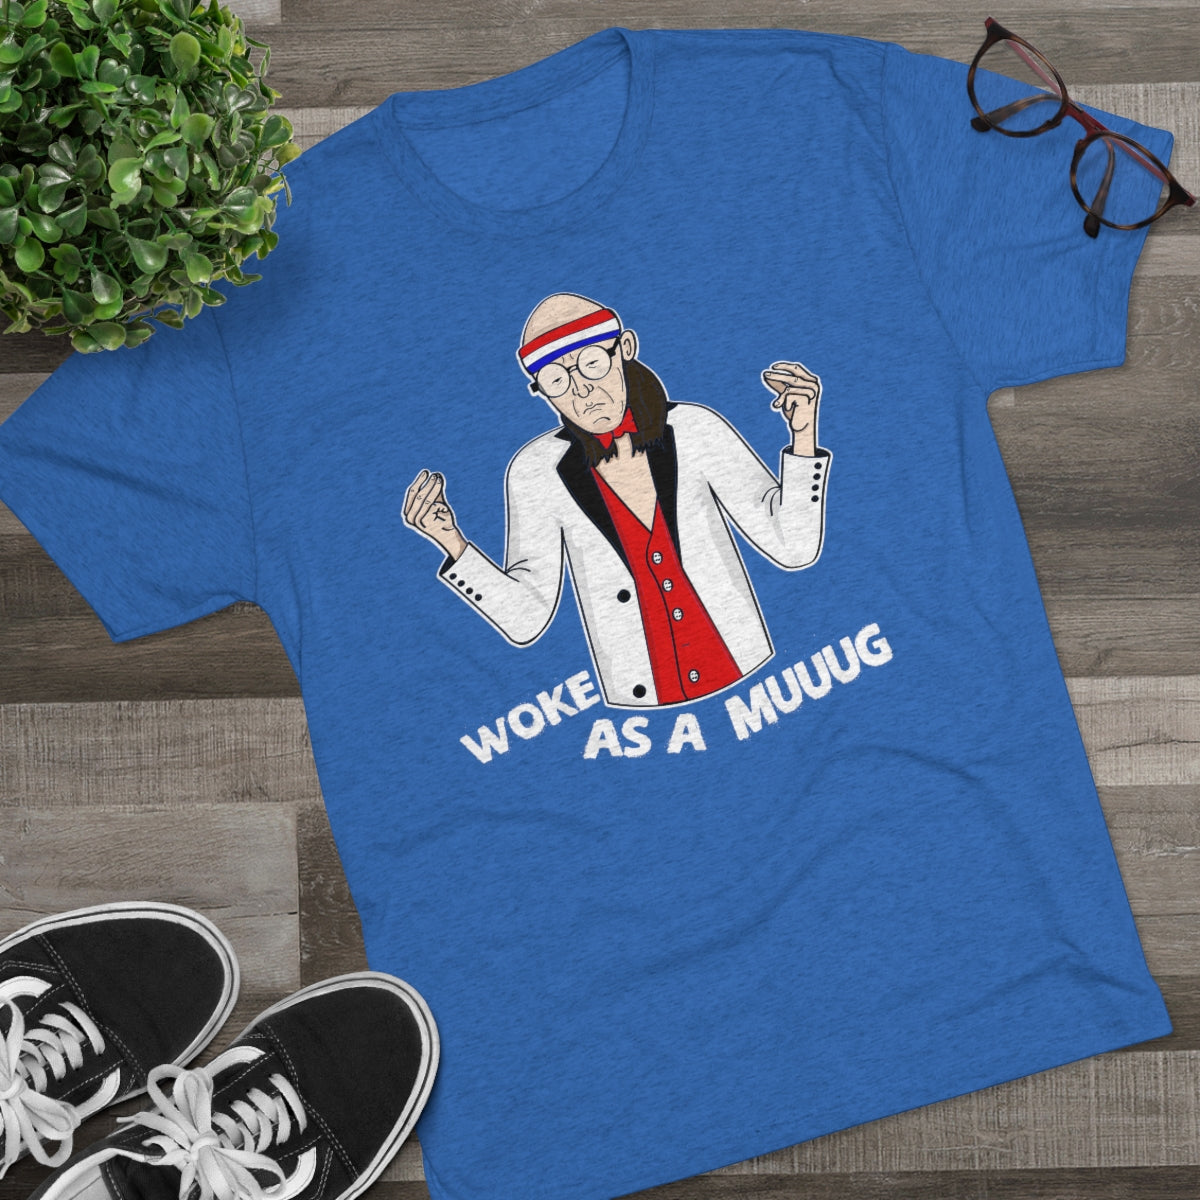 Chipperson Woke as a Muuug Triblend Athletic Fit Shirt